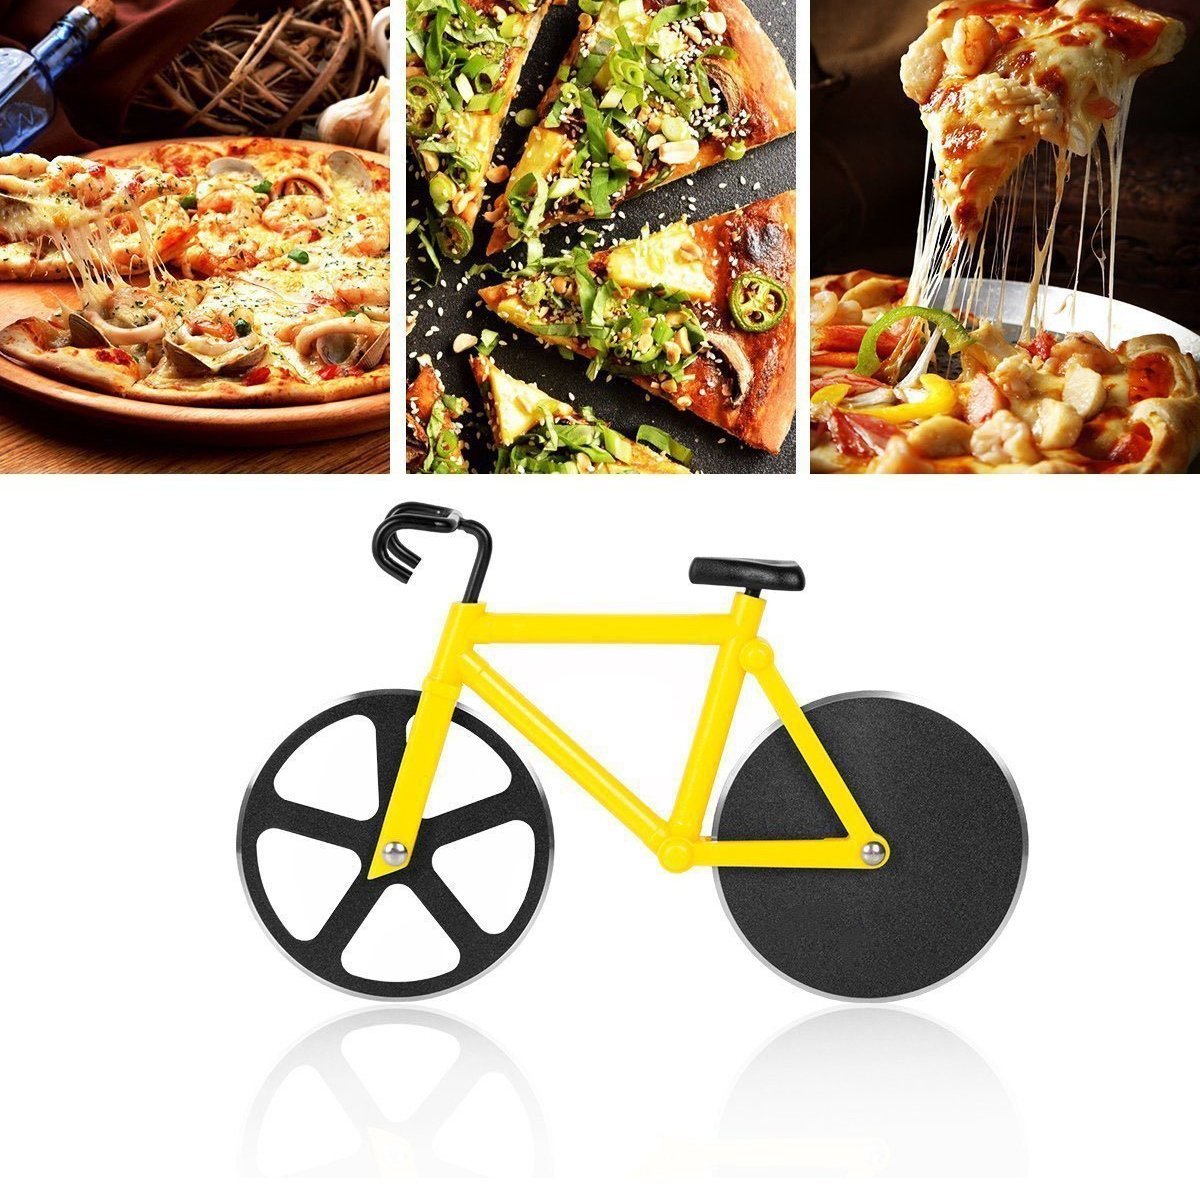 0649 stainless steel Bicycle shape Pizza cutter - SkyShopy